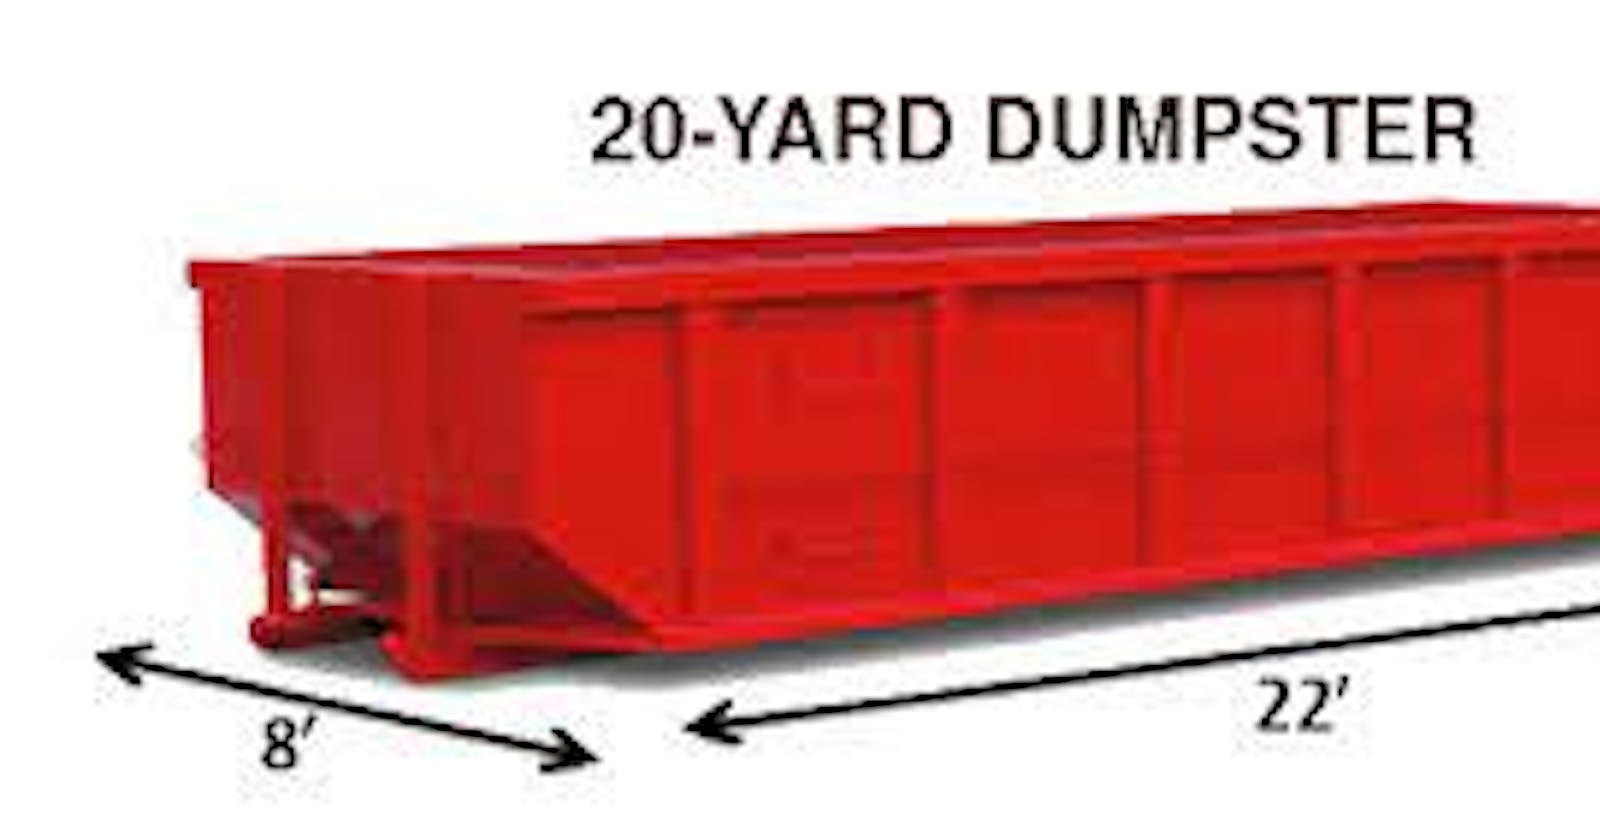 Dumpster Rentals - How You Can Hire The Best One?